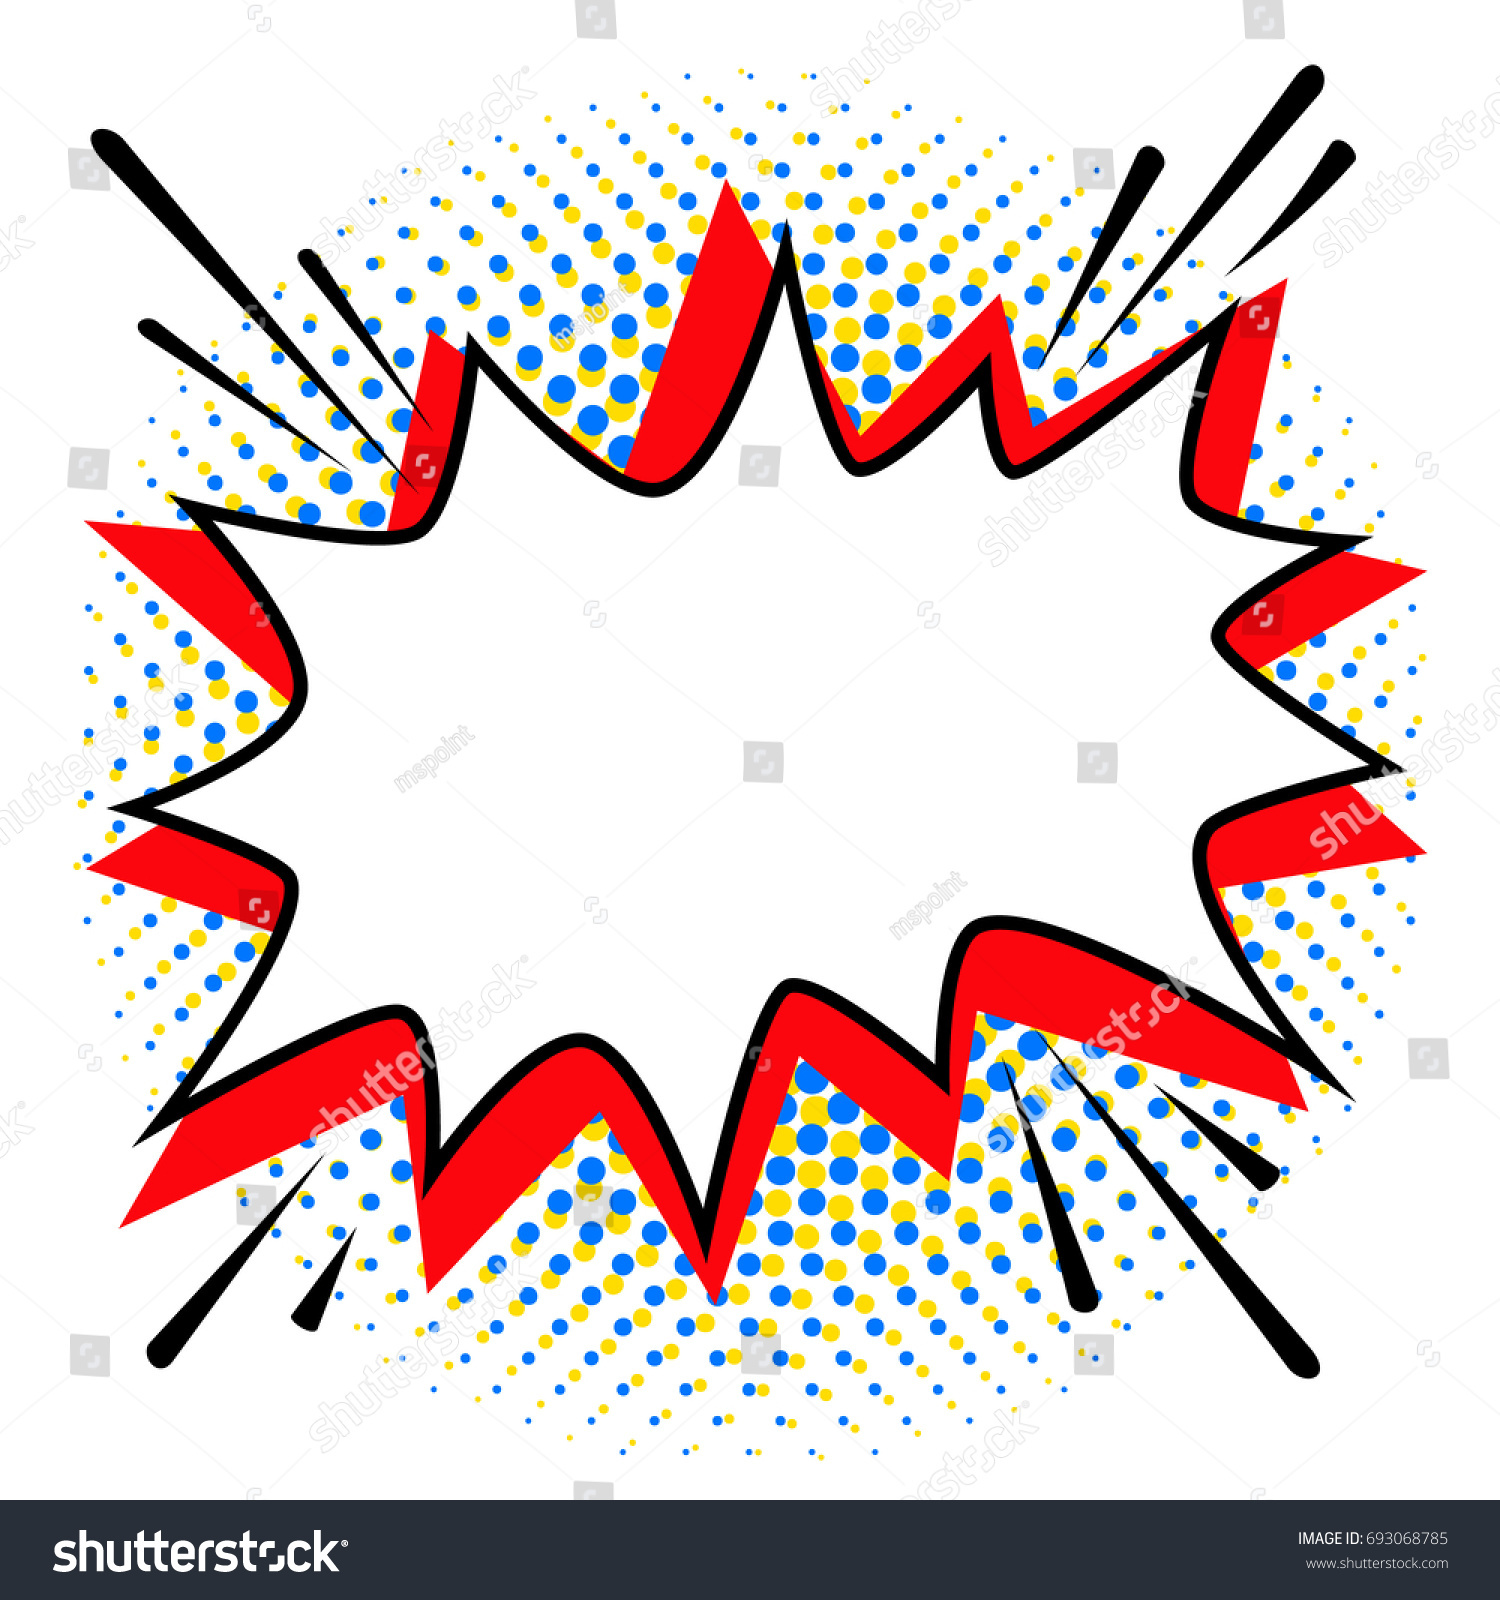 stock vector pop art styled speech bubble template for your design comics pop art style empty bang shape on a 693068785